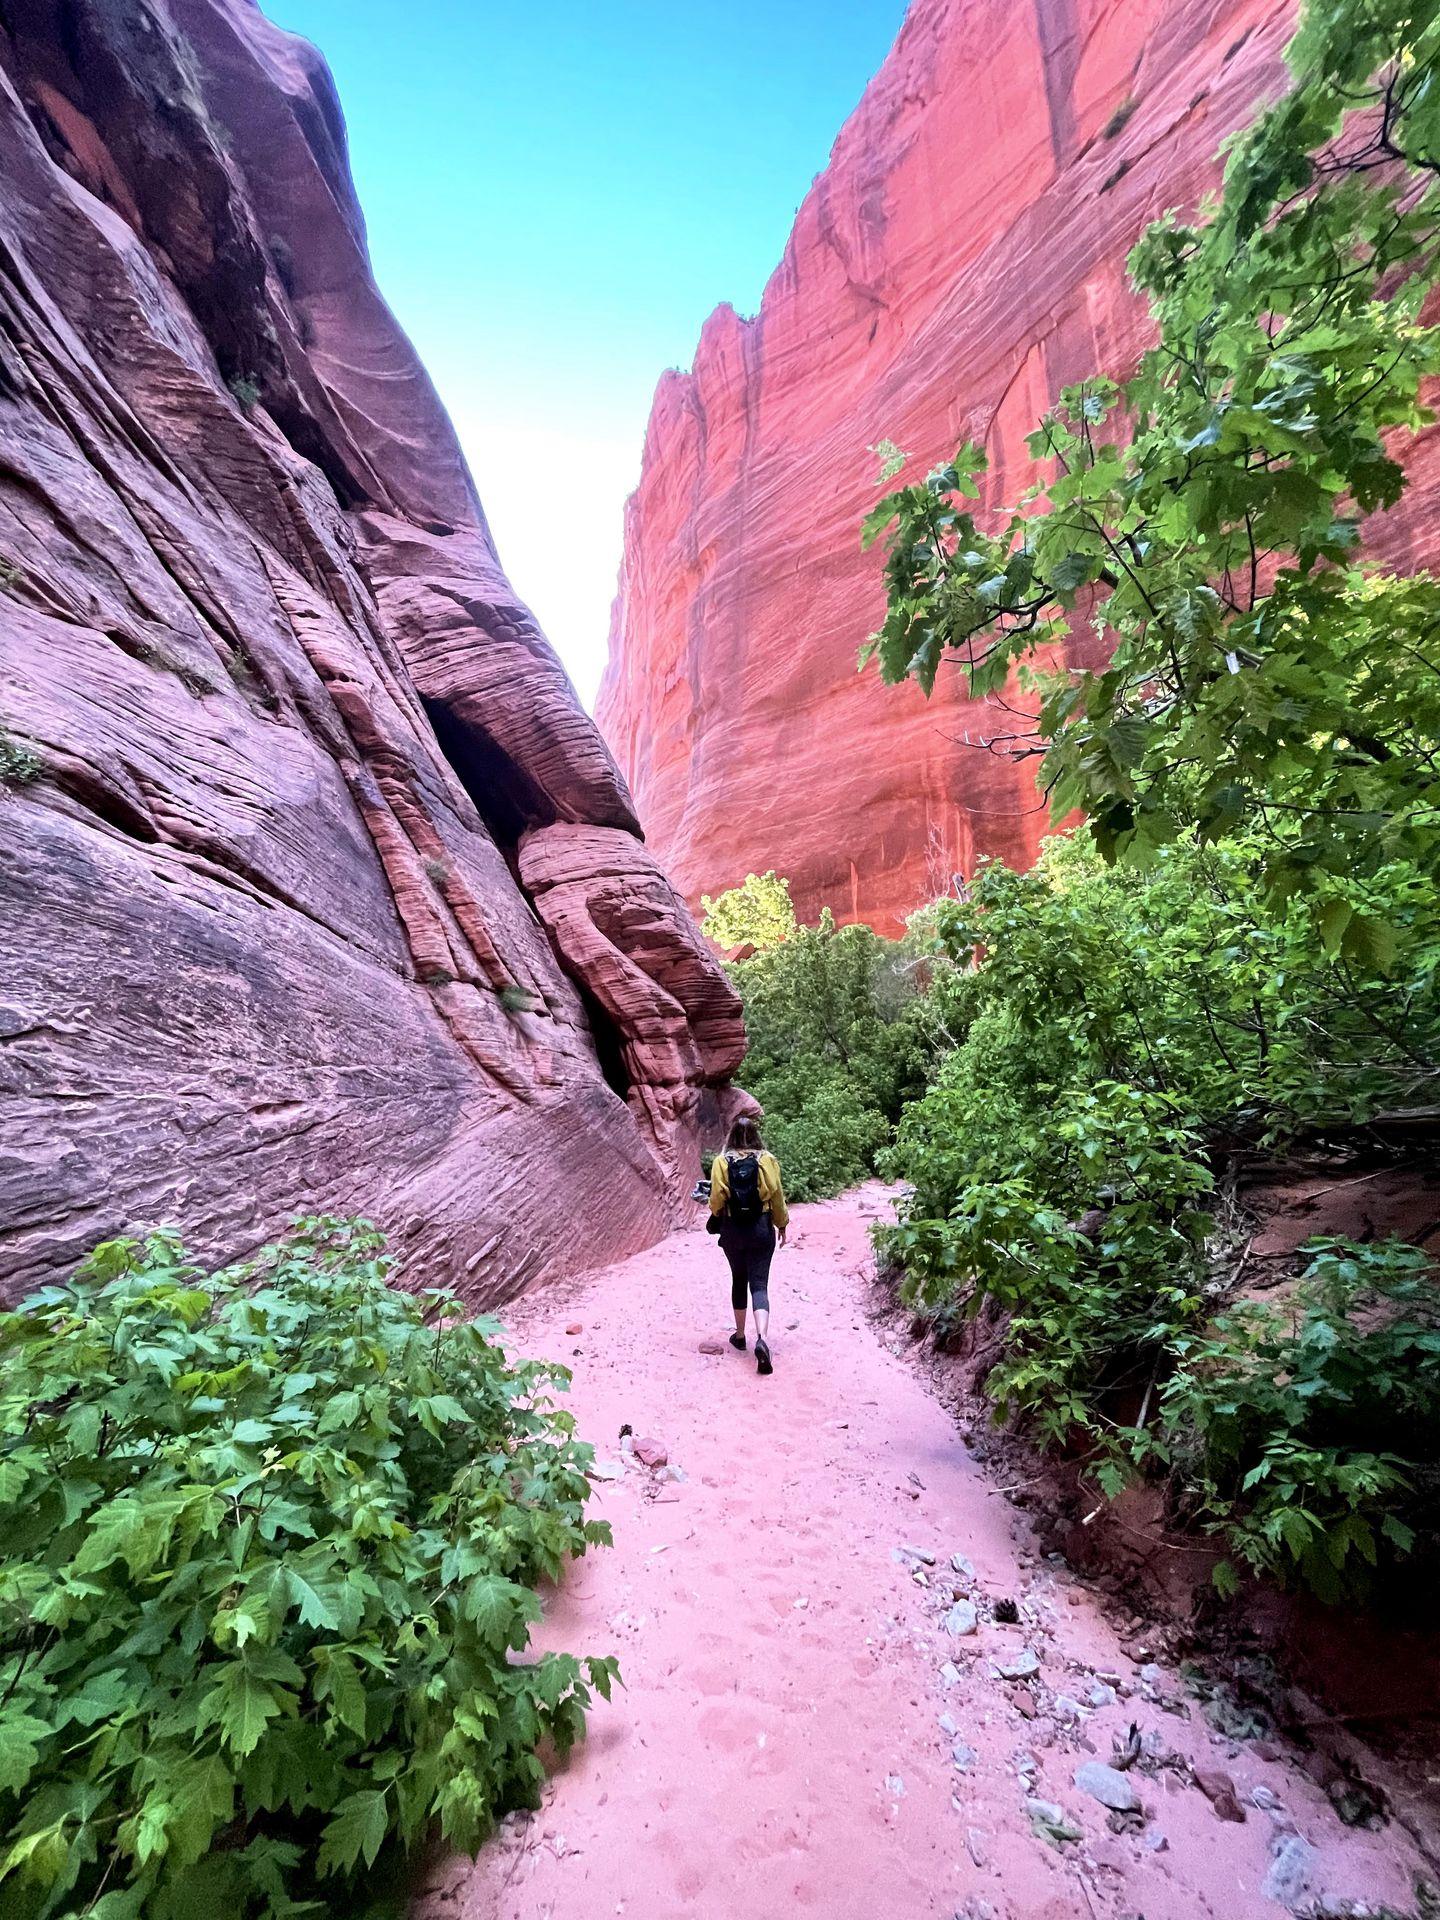 Lydia hiking on pink sand next to an orange cliff in the Kolob Canyons area of Zion National Park.